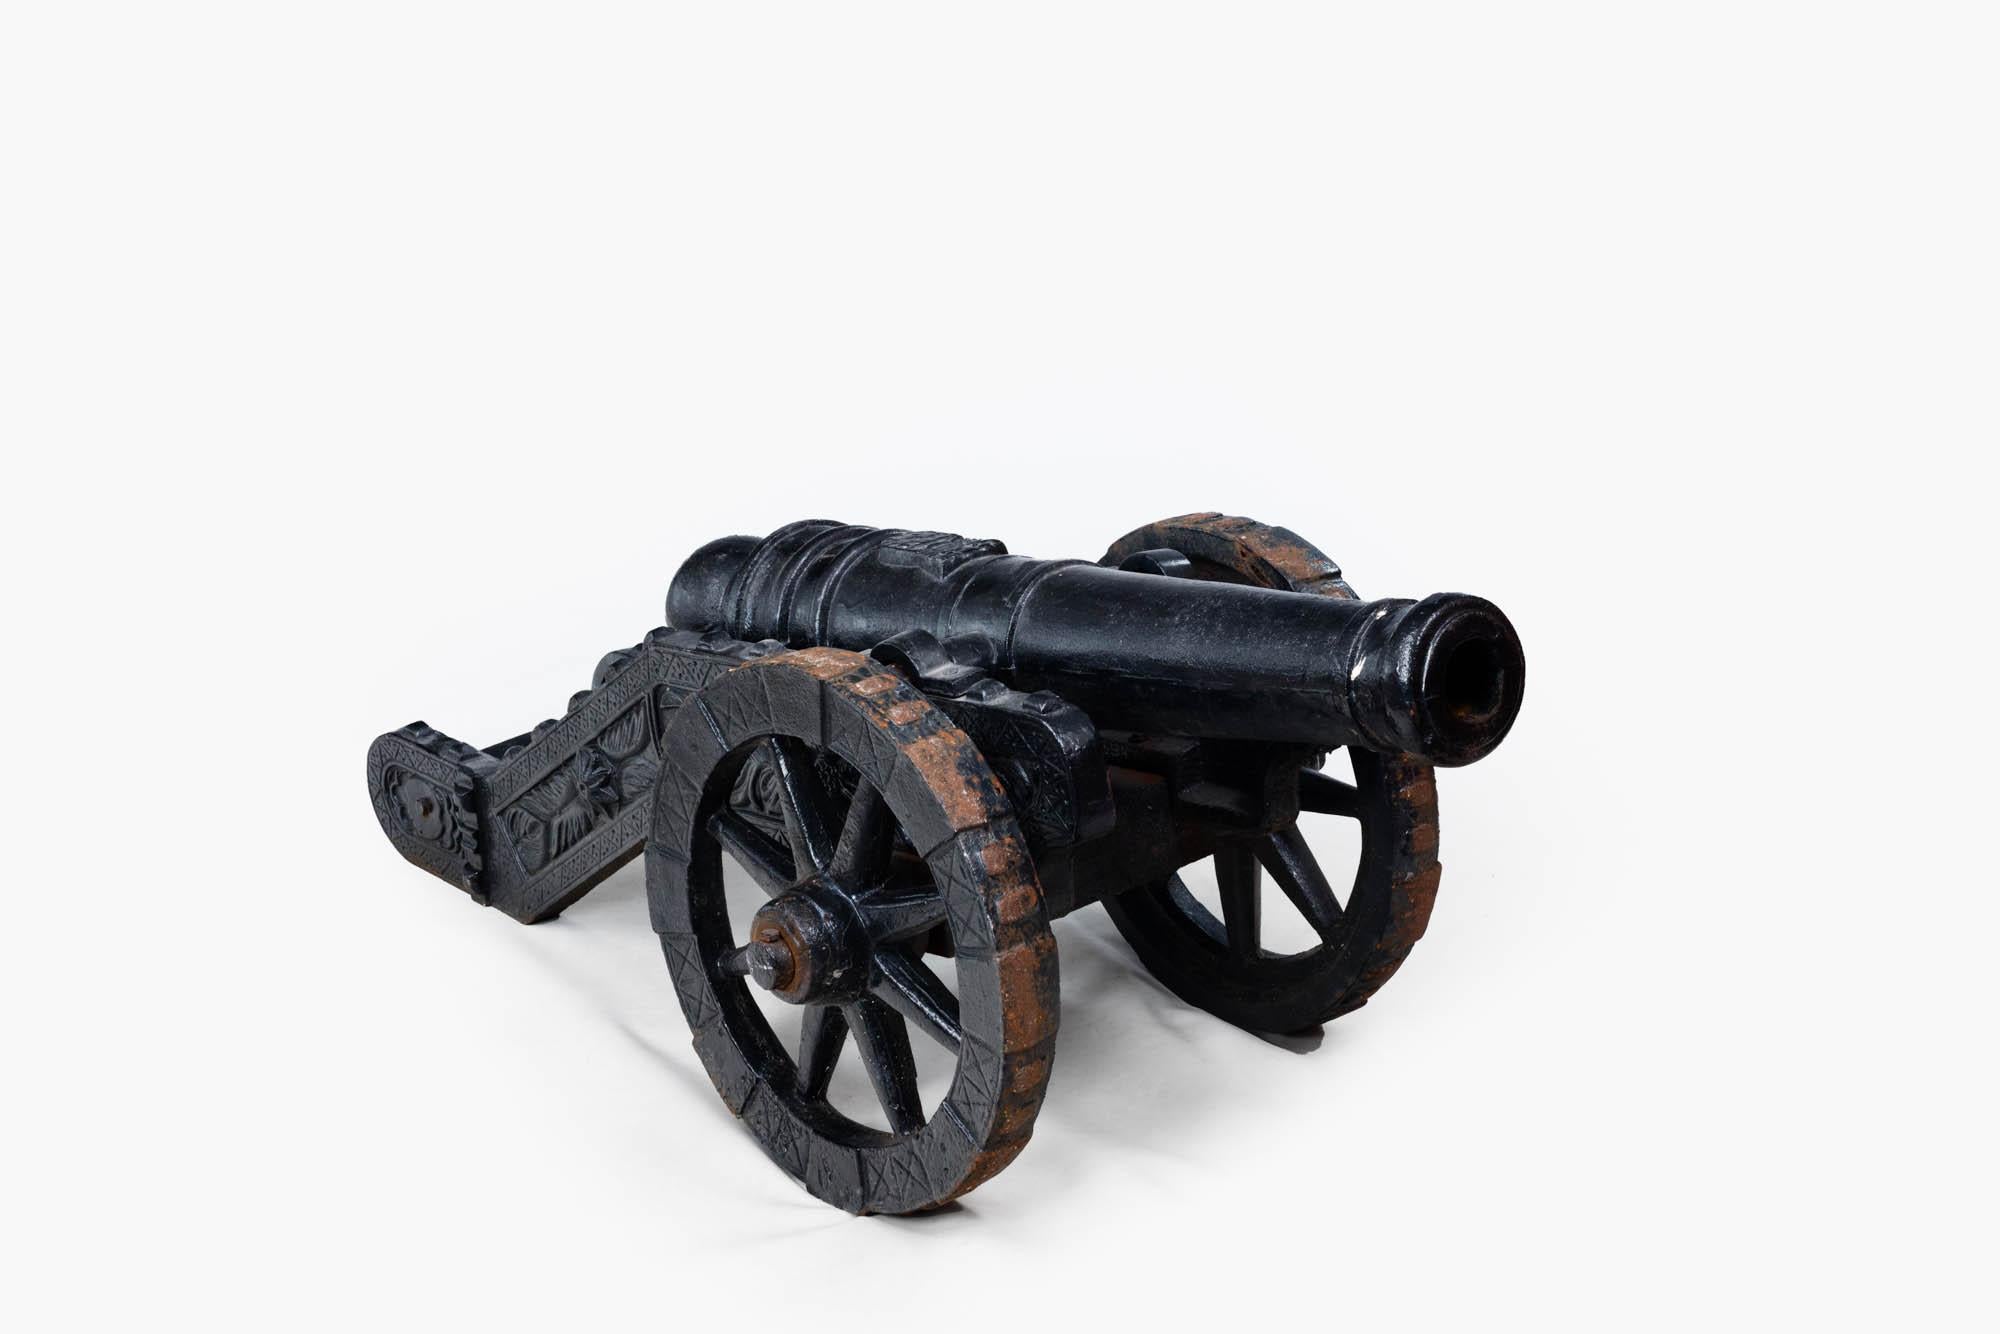 Cast Iron Cannon - 11 For Sale on 1stDibs | cast iron cannons for sale,  garden cannons for sale, antique cast iron cannon for sale